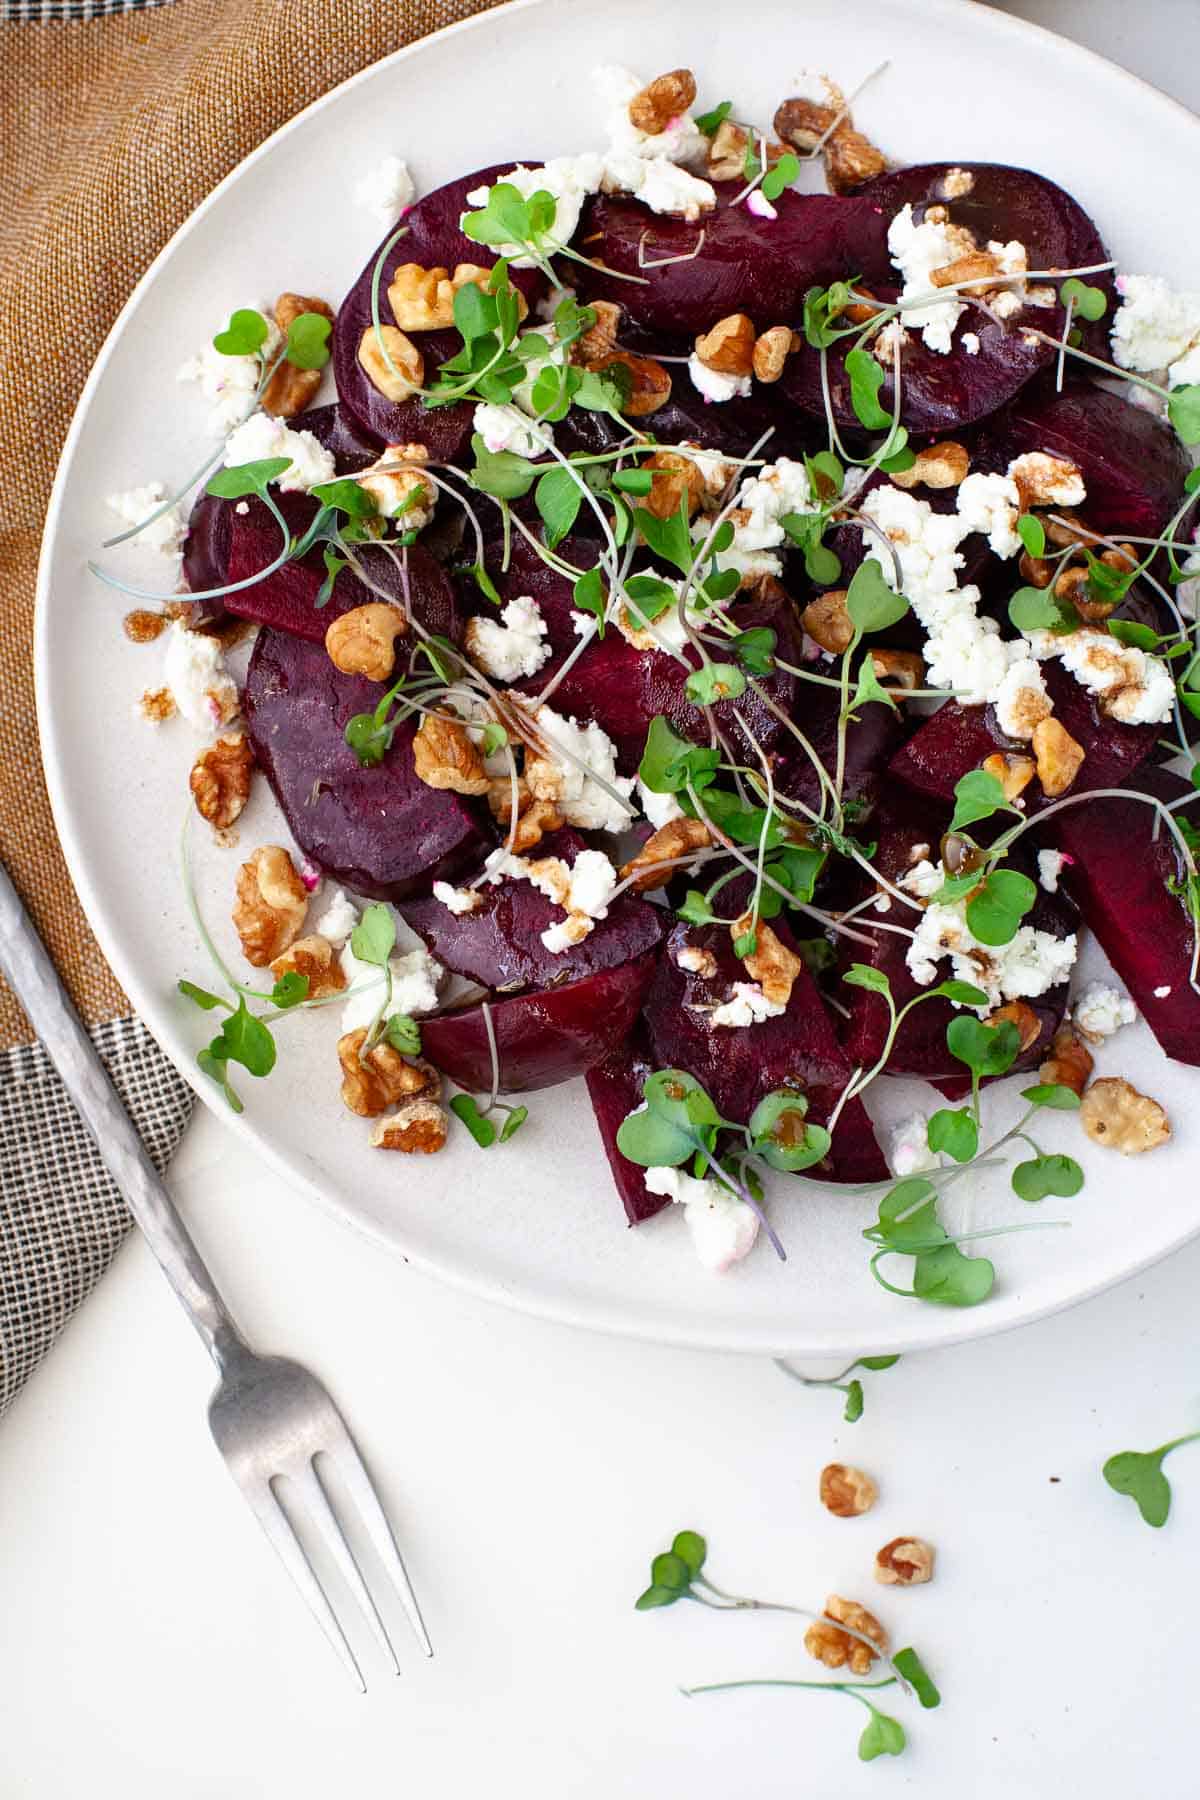 Beetroot salad with feta on white dish alongside kitchen towel and small silver fork